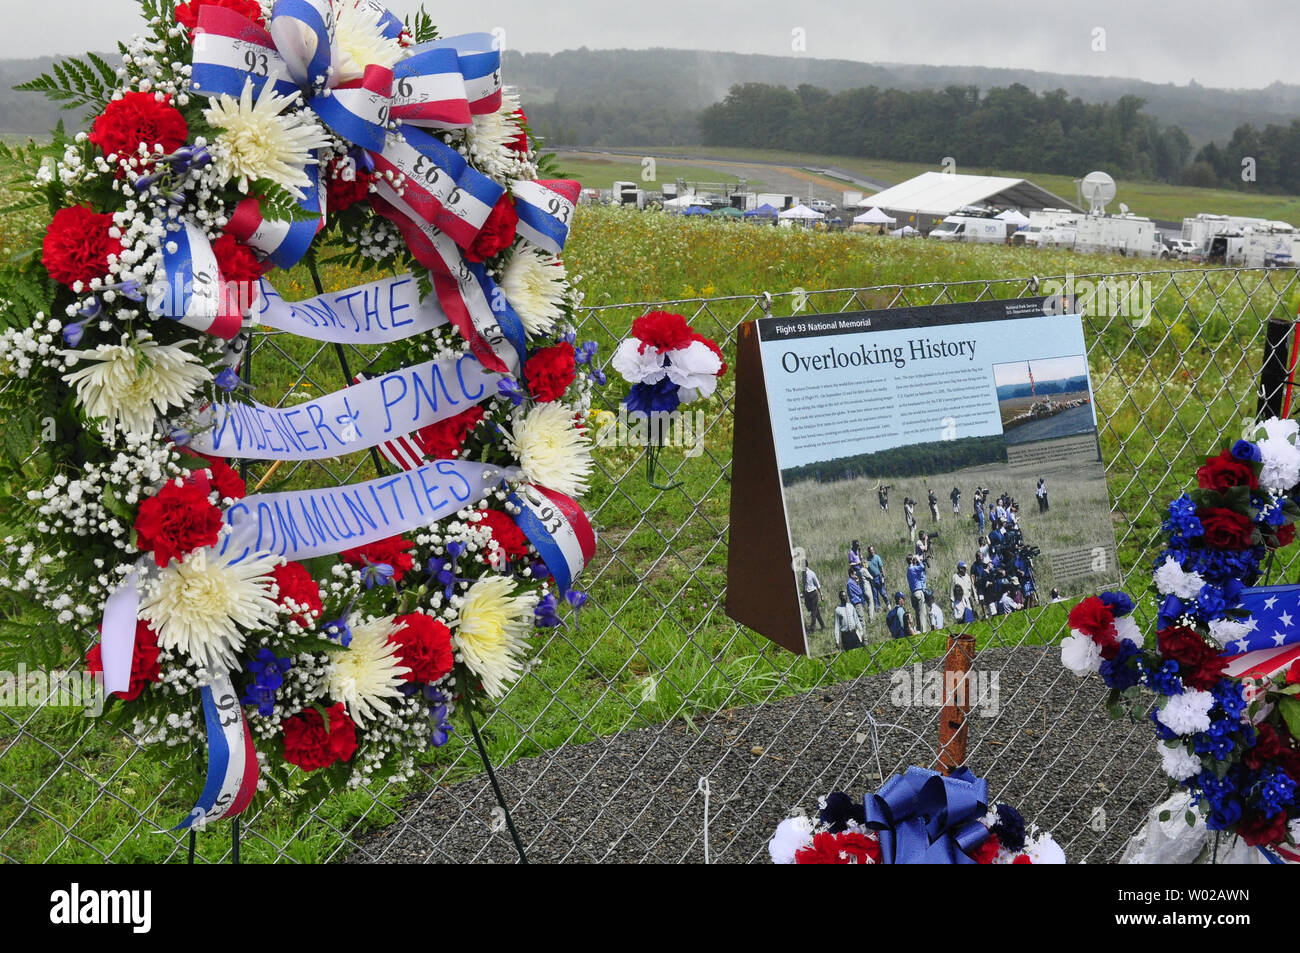 Media satellites trucks forms a backdrop for flags, messages and flowers left at the Temporary Memorial on September 9, 2011, the eve of the dedication of the permanent National Memorial overlooking the crash site of Flight 93 where 40 people lost then lives 10 years ago in the terrorist attacks of September 11, 2001.   UPI/Archie Carpenter Stock Photo